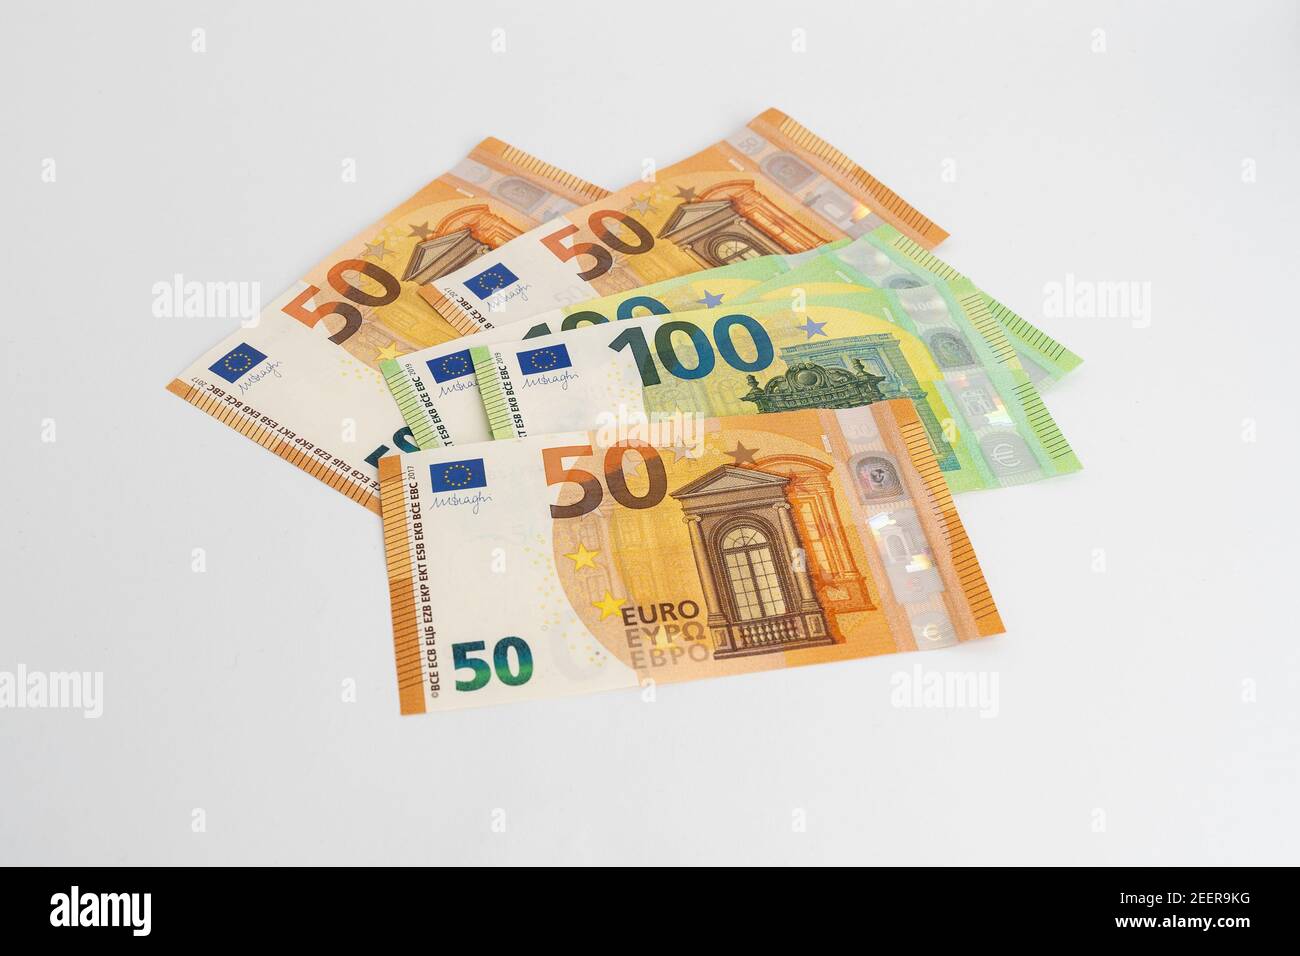 Banknotes on white background. Fifty and one hundred Euro notes in orange and green color. Currency of Europe. Stock Photo